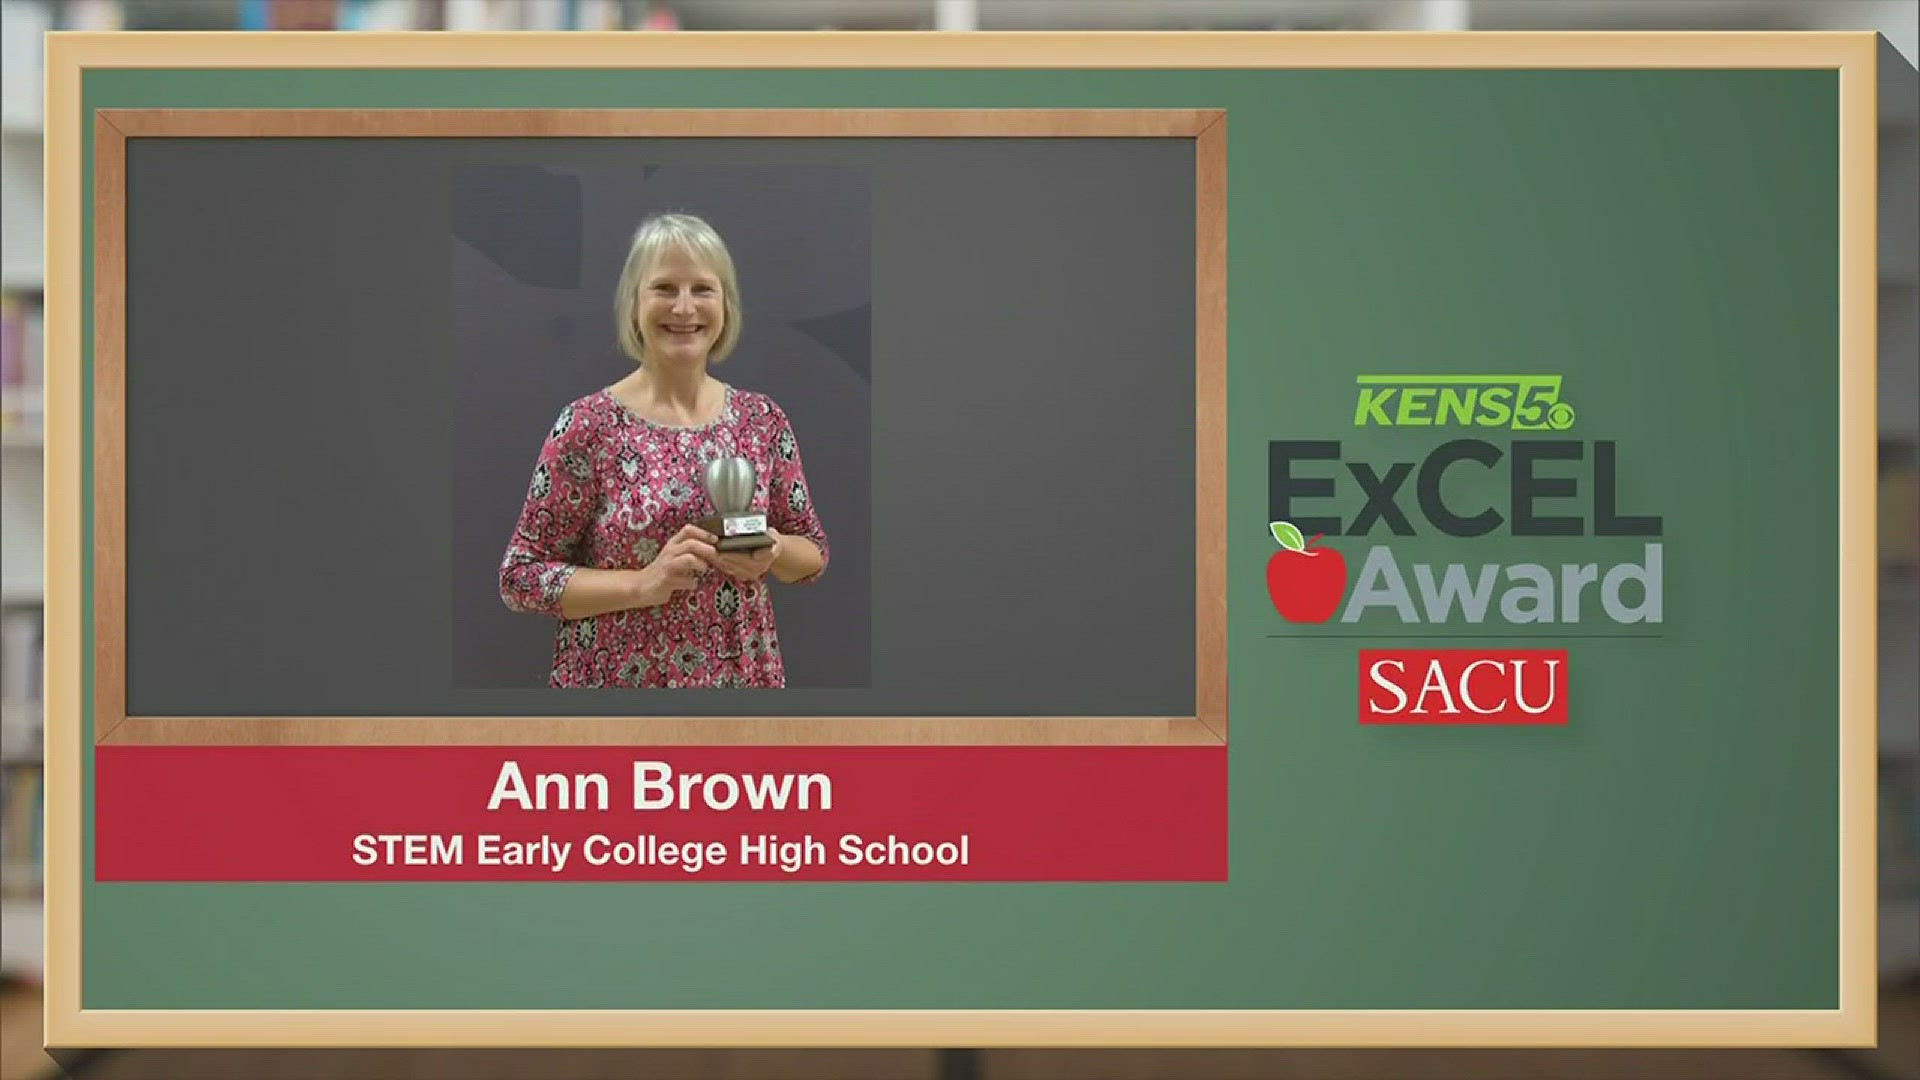 Ann Brown spent 20 years in a medical lab before becoming a teacher. In addition to opening their eyes to science, she takes students on field trips to colleges.